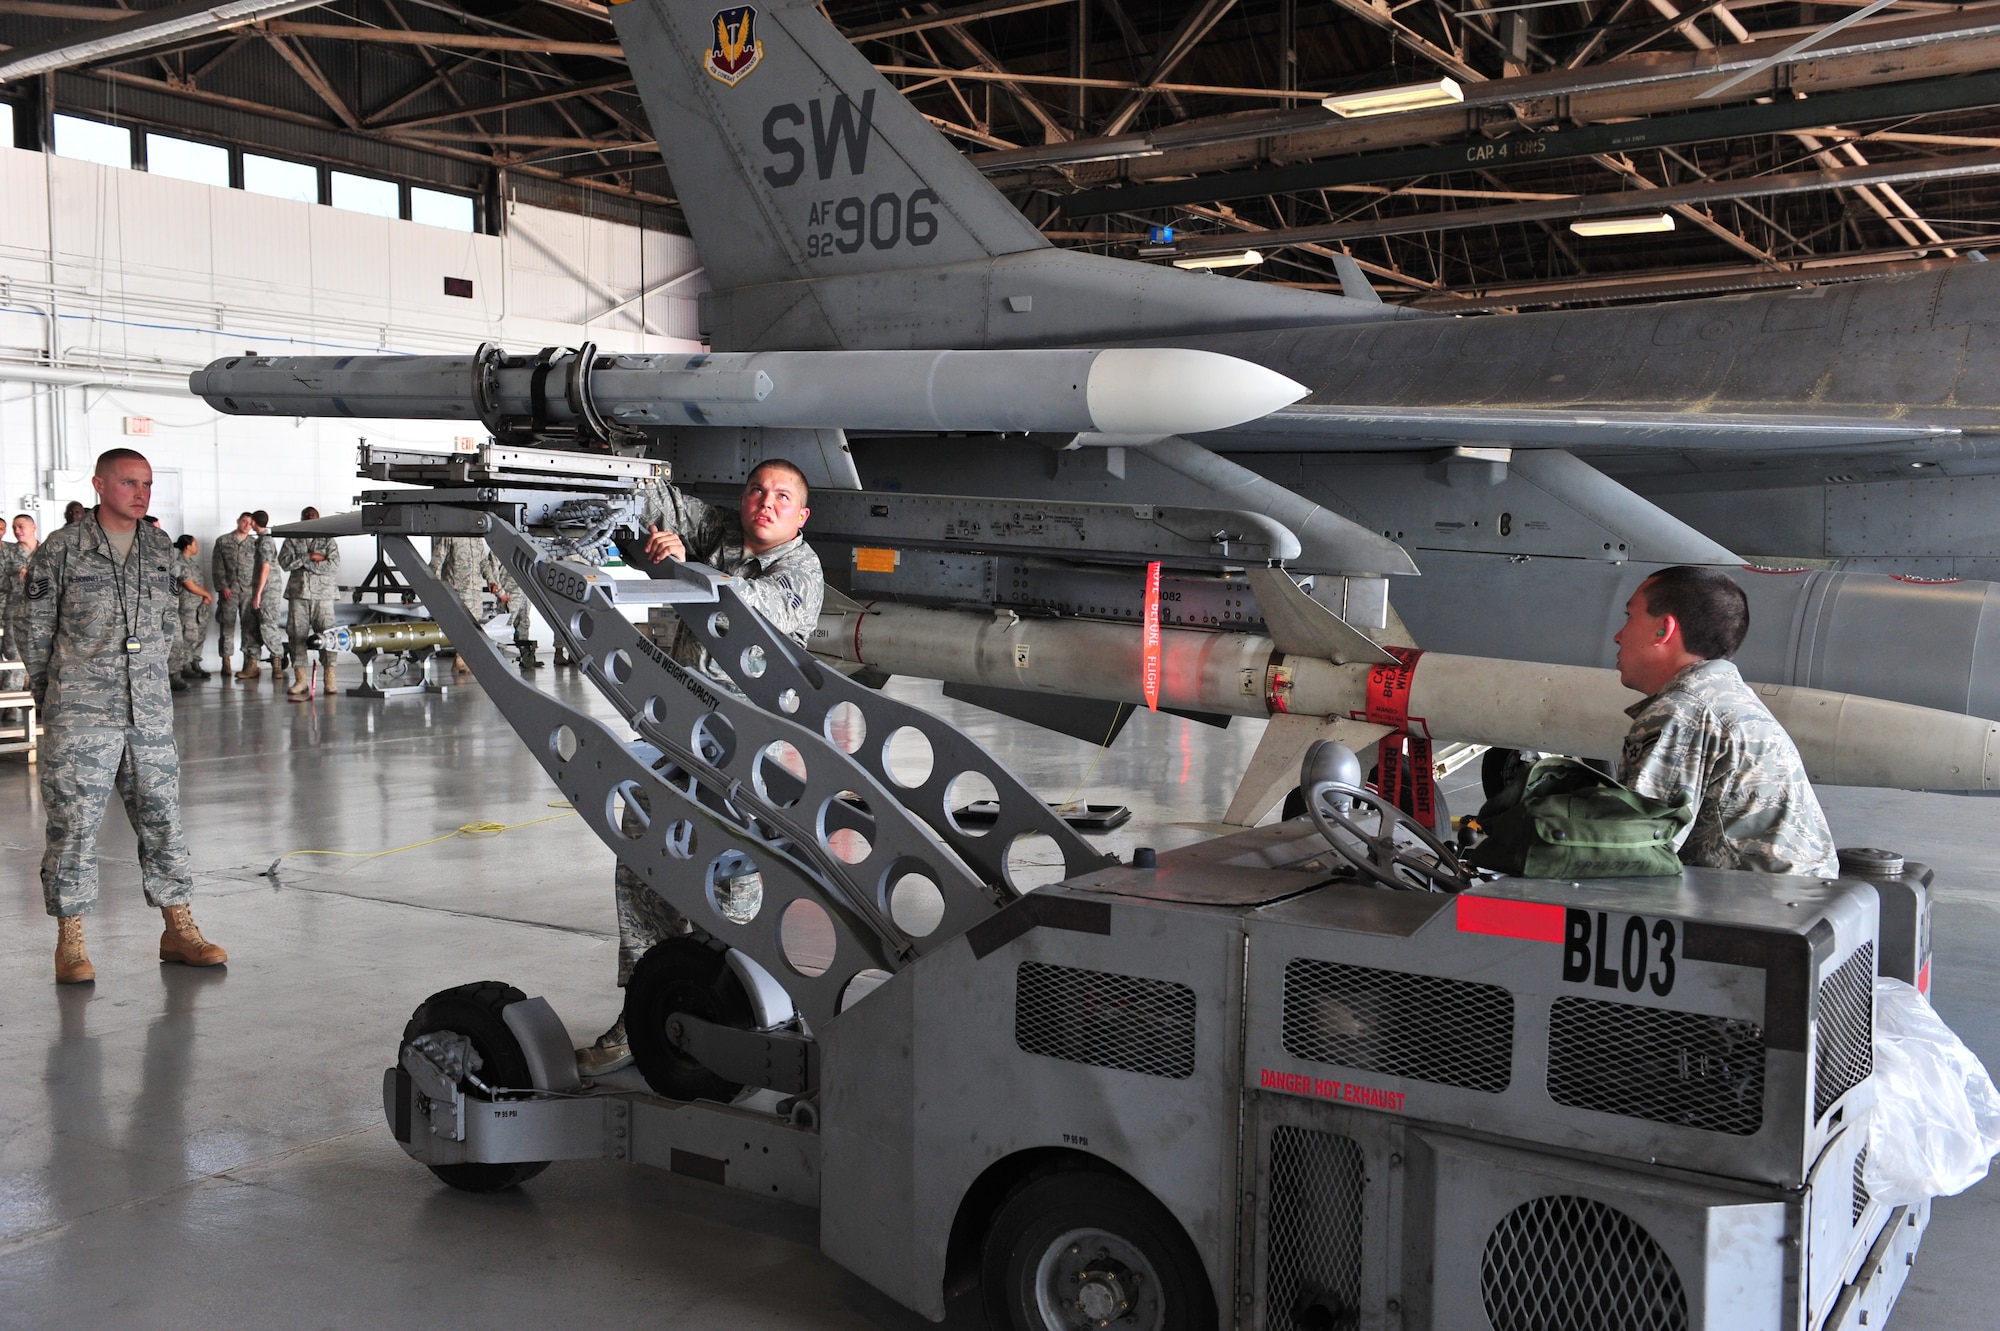 100416-F-8430J-165
SHAW AIR FORCE BASE, S.C. -- Tech. Sgt. Samuel McDonnell (left), 20th Fighter Wing Maintenance Group, watches as Staff Sgt. James Seagle (center) and Airman 1st Class Hunter Haley, 79th Aircraft Maintenance Unit, load a missile into place April 16, 2010. Wing weapons standardization held the first Weapons Load Crew of the Quarter Competition for 2010. The 55th and 79th Aircraft Maintenance Units Weapons load crews competed against each other in a race against time. Both load crews were tasked to load two air intercept missiles (AIM - 120) and two air-to-ground missiles (AGM - 88) within 45 minutes.  (U.S. Air Force photo/Airman 1st Class Amber E. N. Jacobs)